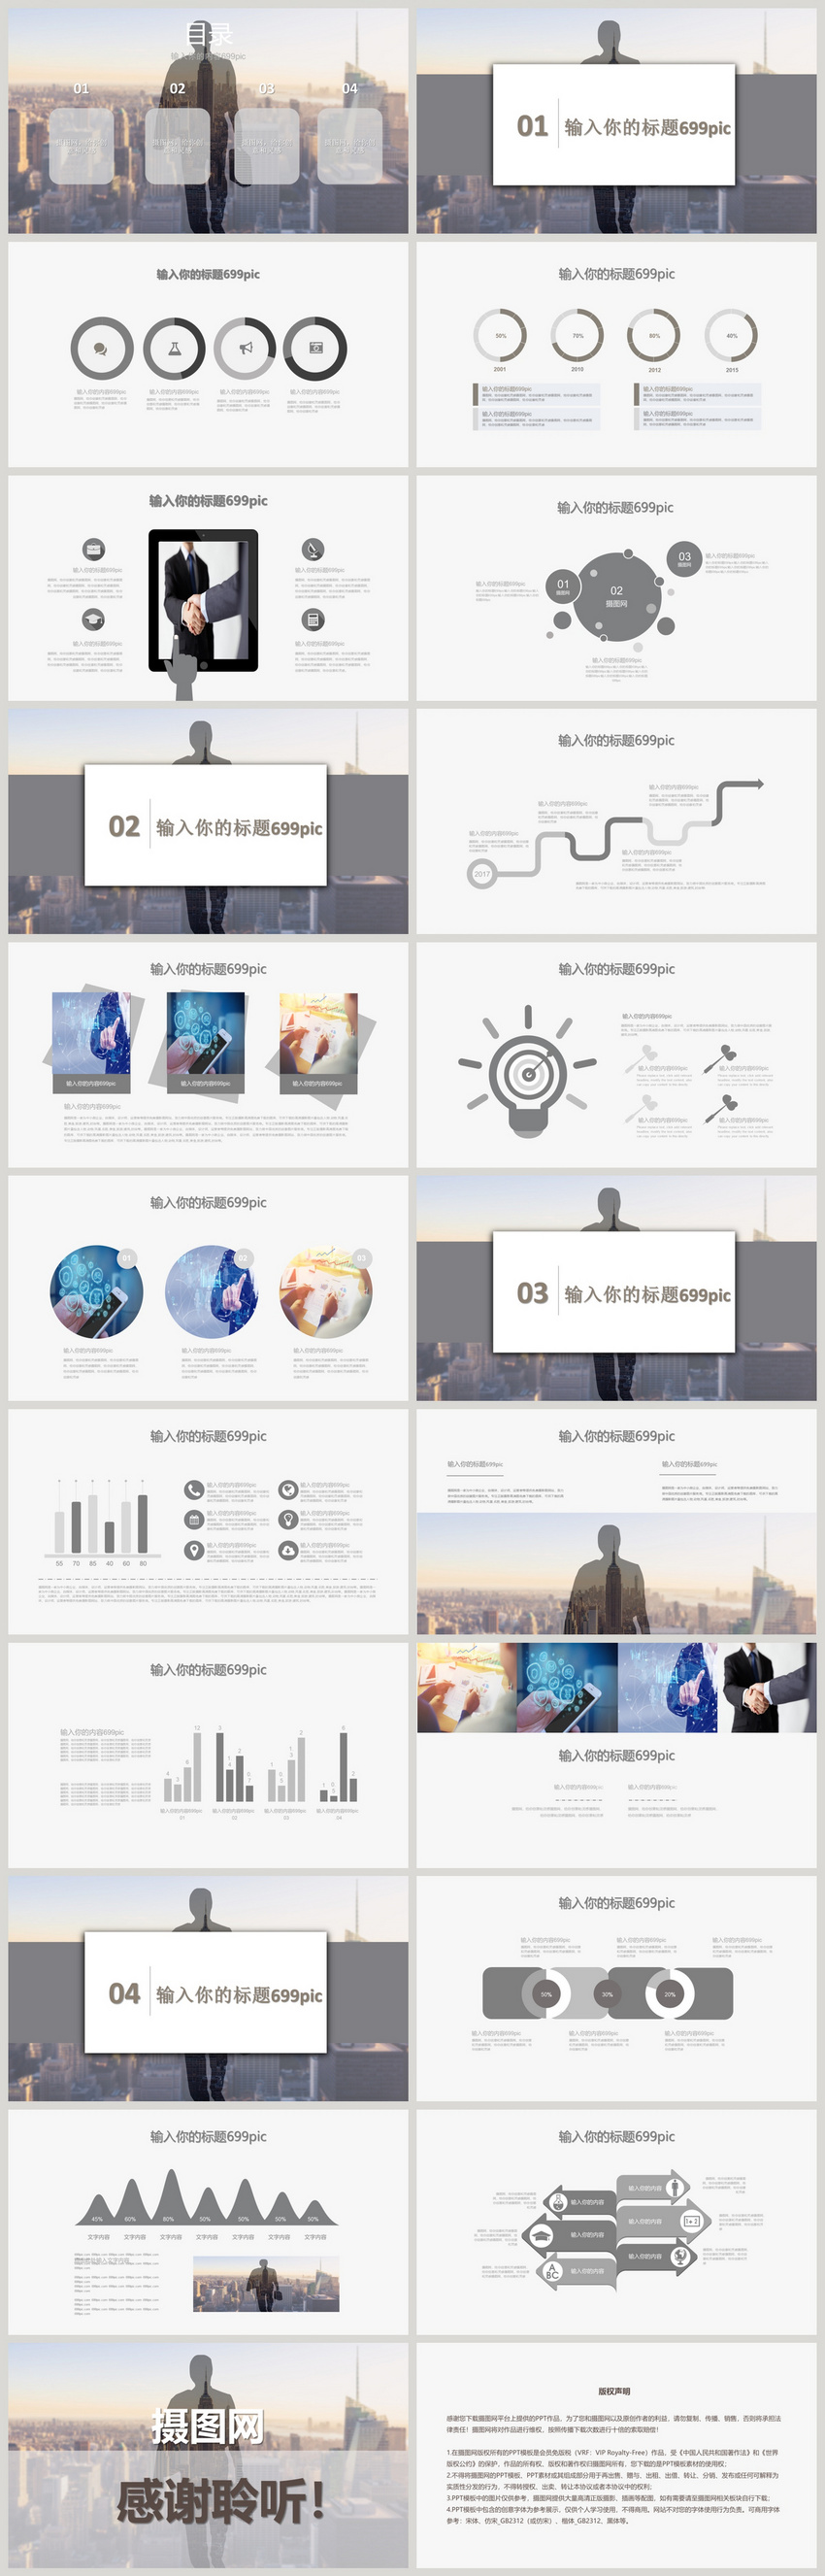 Work Report Dynamic Ppt Template Powerpoint Templete Ppt Free Download 400091459 Lovepik Com